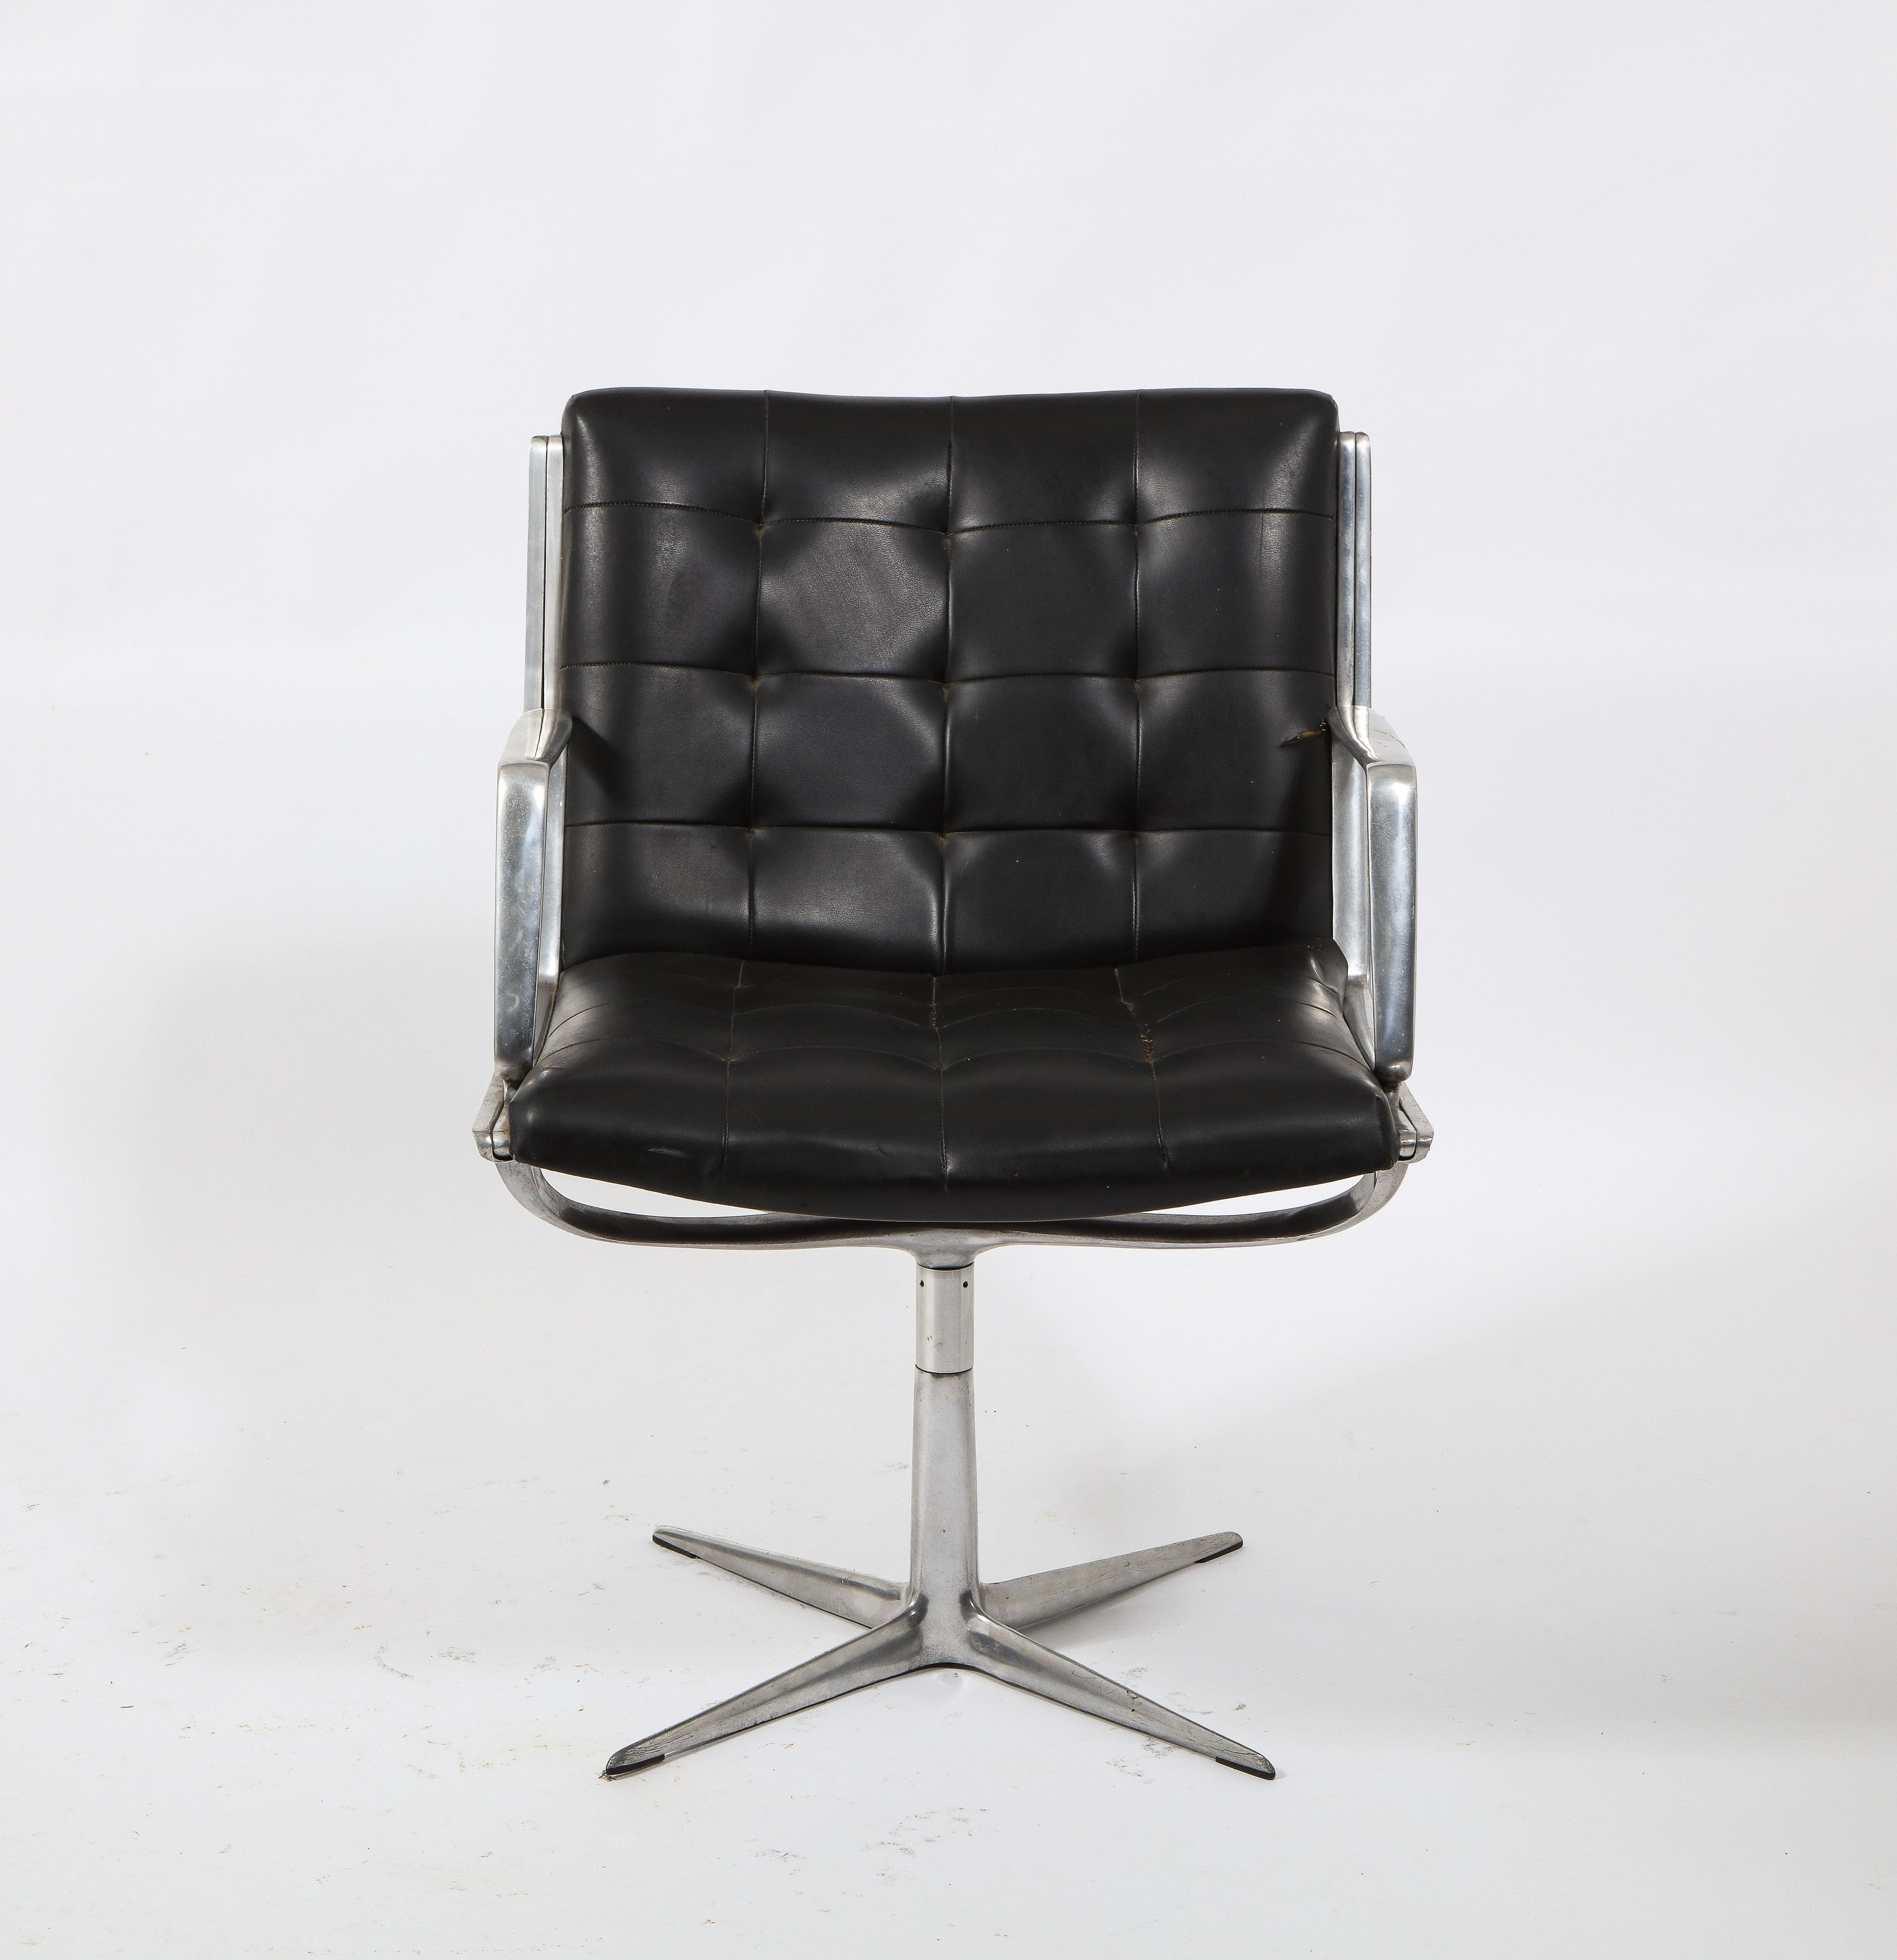 Rare pair of swivel chairs by Alfred Kill for Kill International with unique cast aluminum frames. Pair is available. Price is per chair. Two are available, sold together or separately.